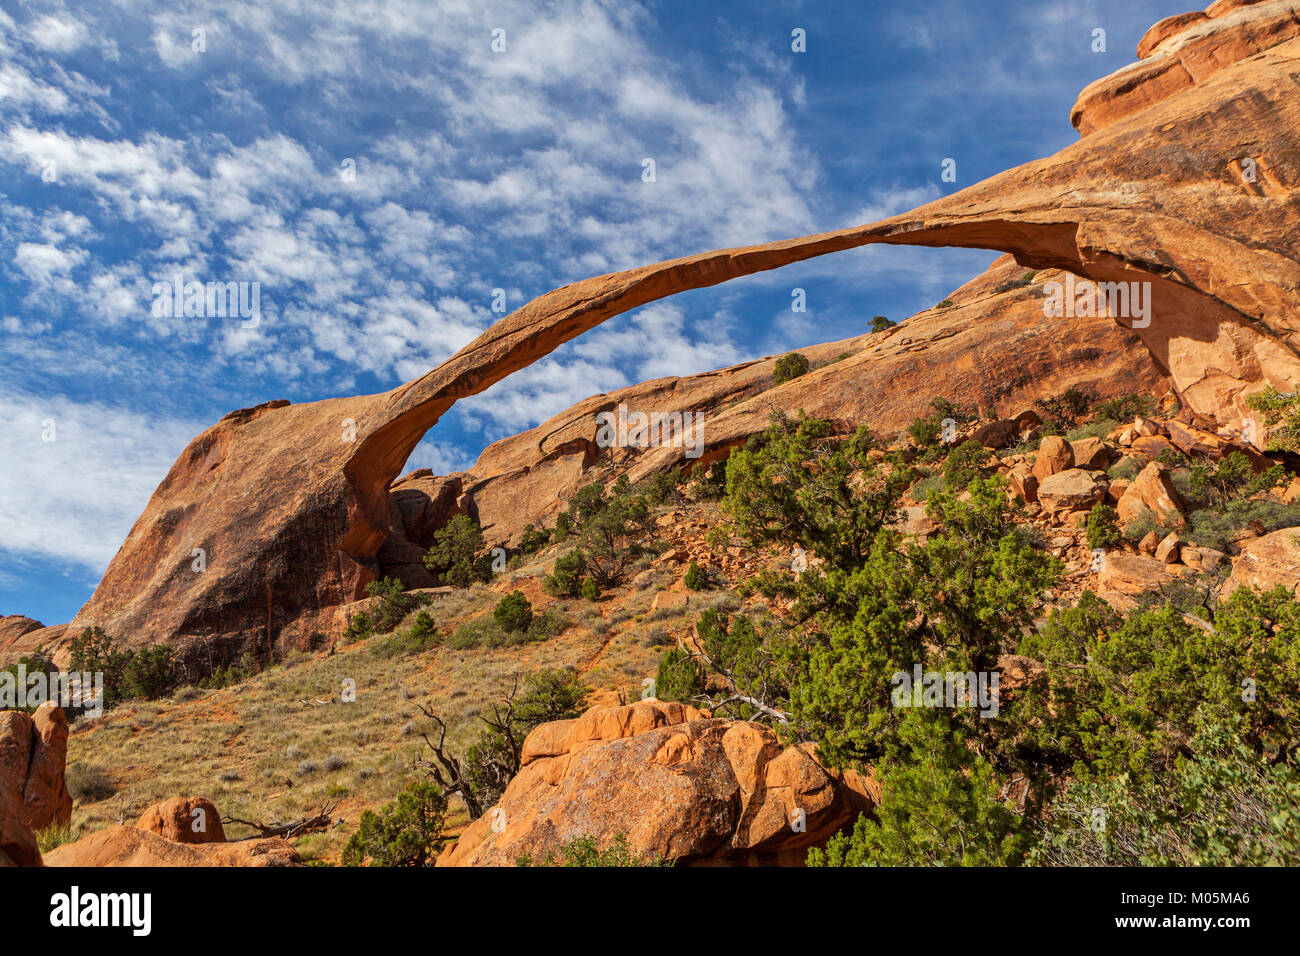 The Landscape Arch in Arches National Park in Utah. Stock Photo